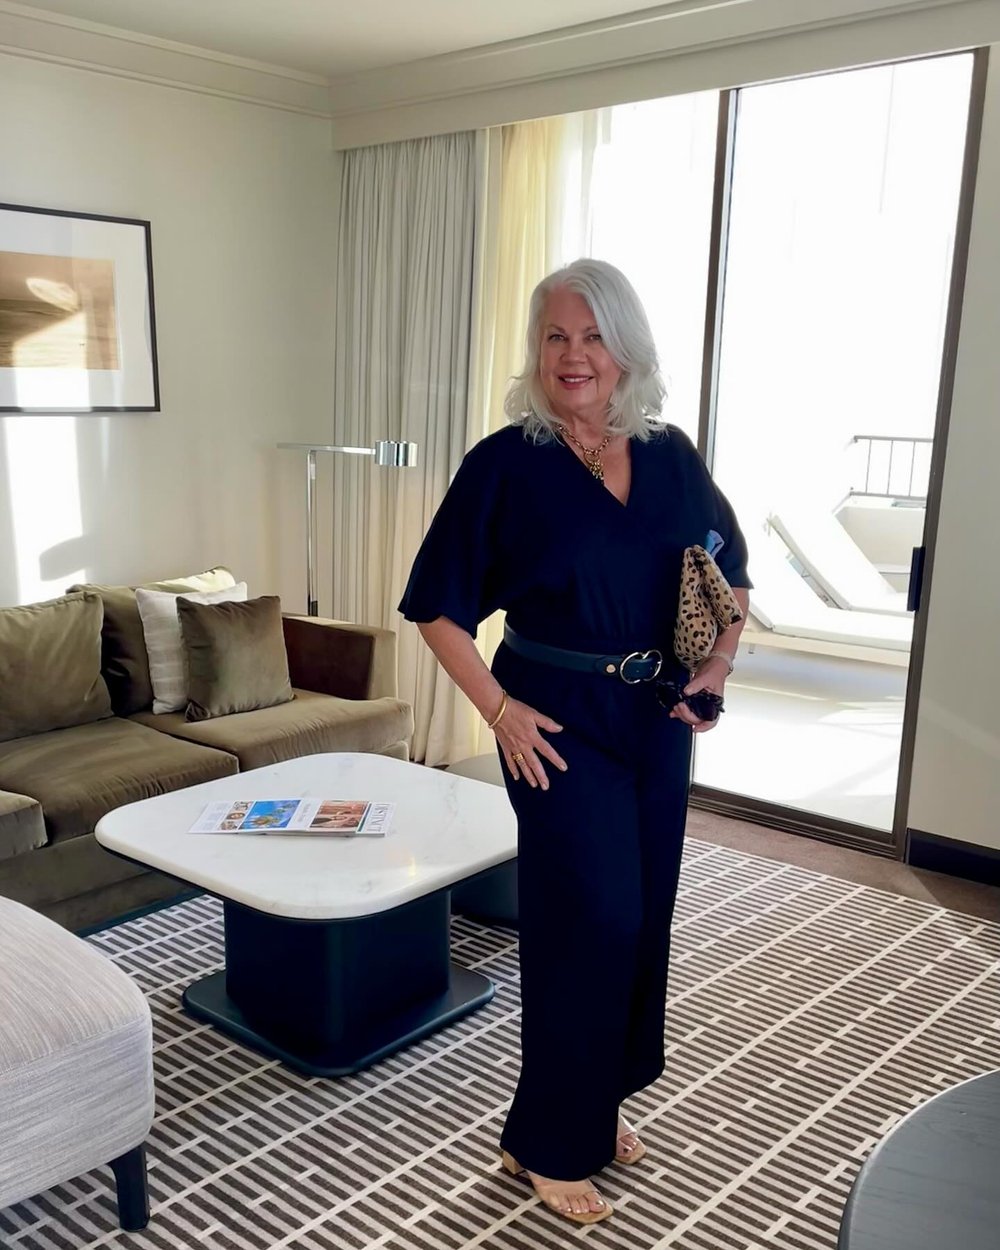 We were blown away when we opened the door to our suite at the Pendry Newport Beach&hellip;The views! The day! Perfection! Let me show you around before my evening event. Thanks to @cadencetravel and @pendrynewportbeach for this lovely surprise! ✨#ca